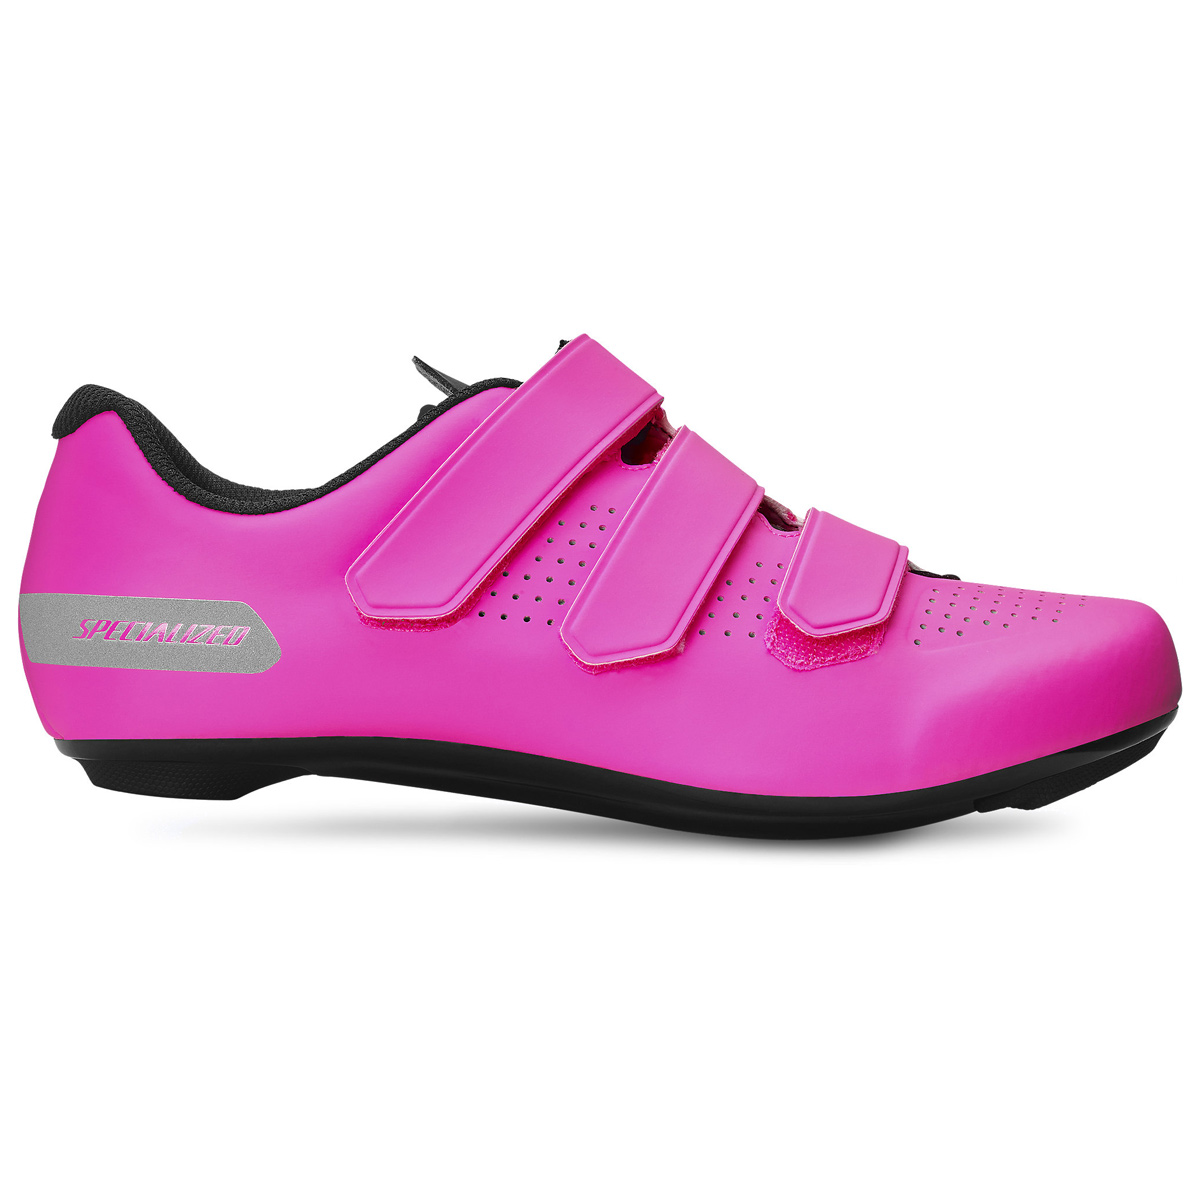 CHAUSSURES SPECIALIZED TORCH 1.0 FEMME